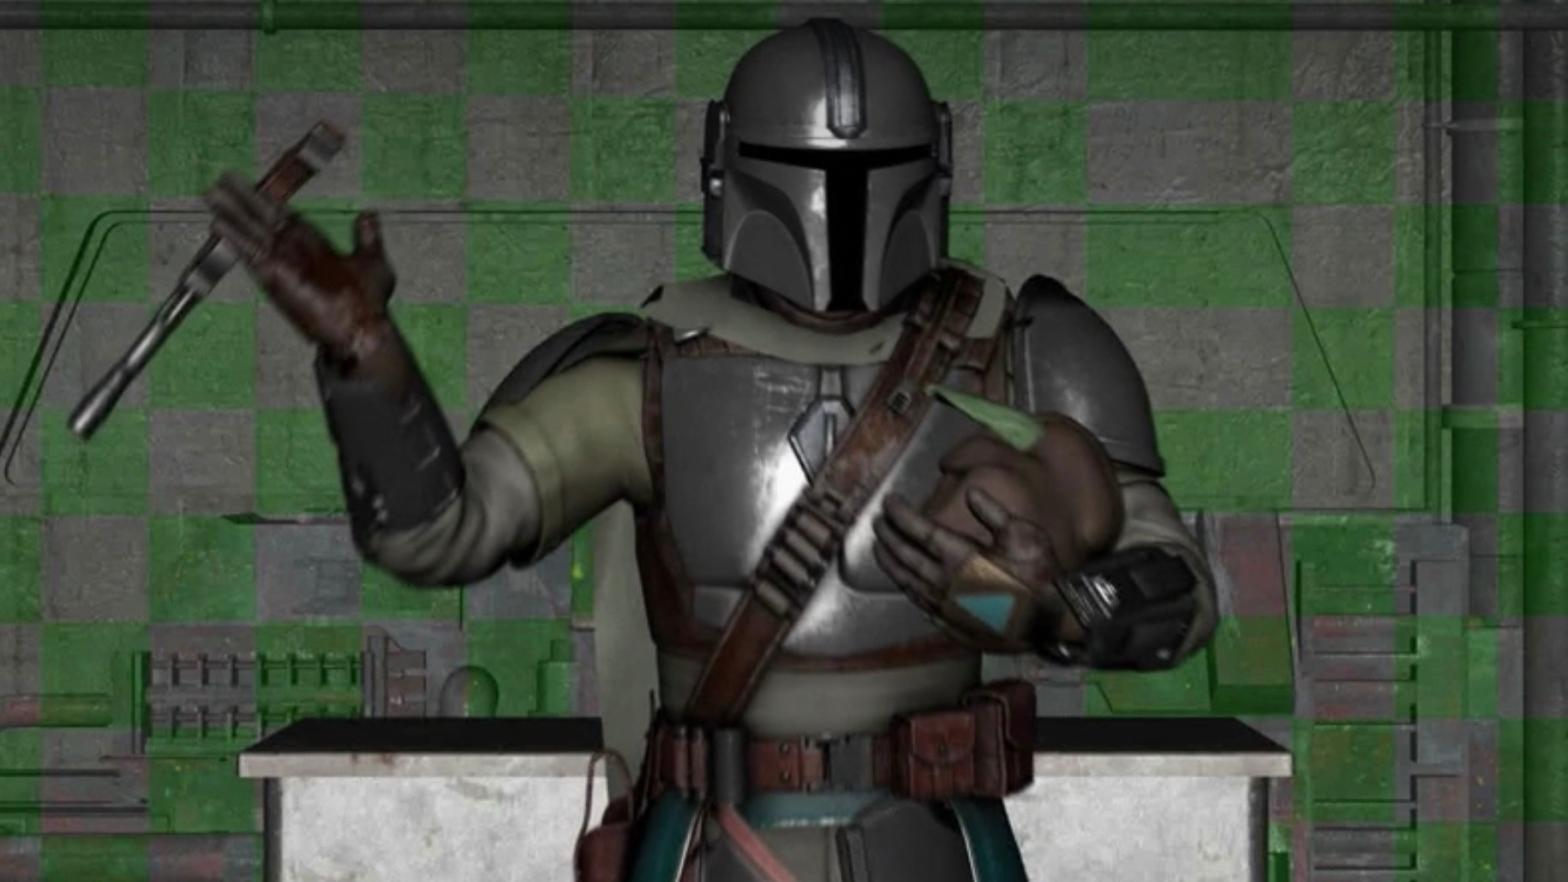 Before production, the entire season of The Mandalorian was completed like this. (Image: Disney+)